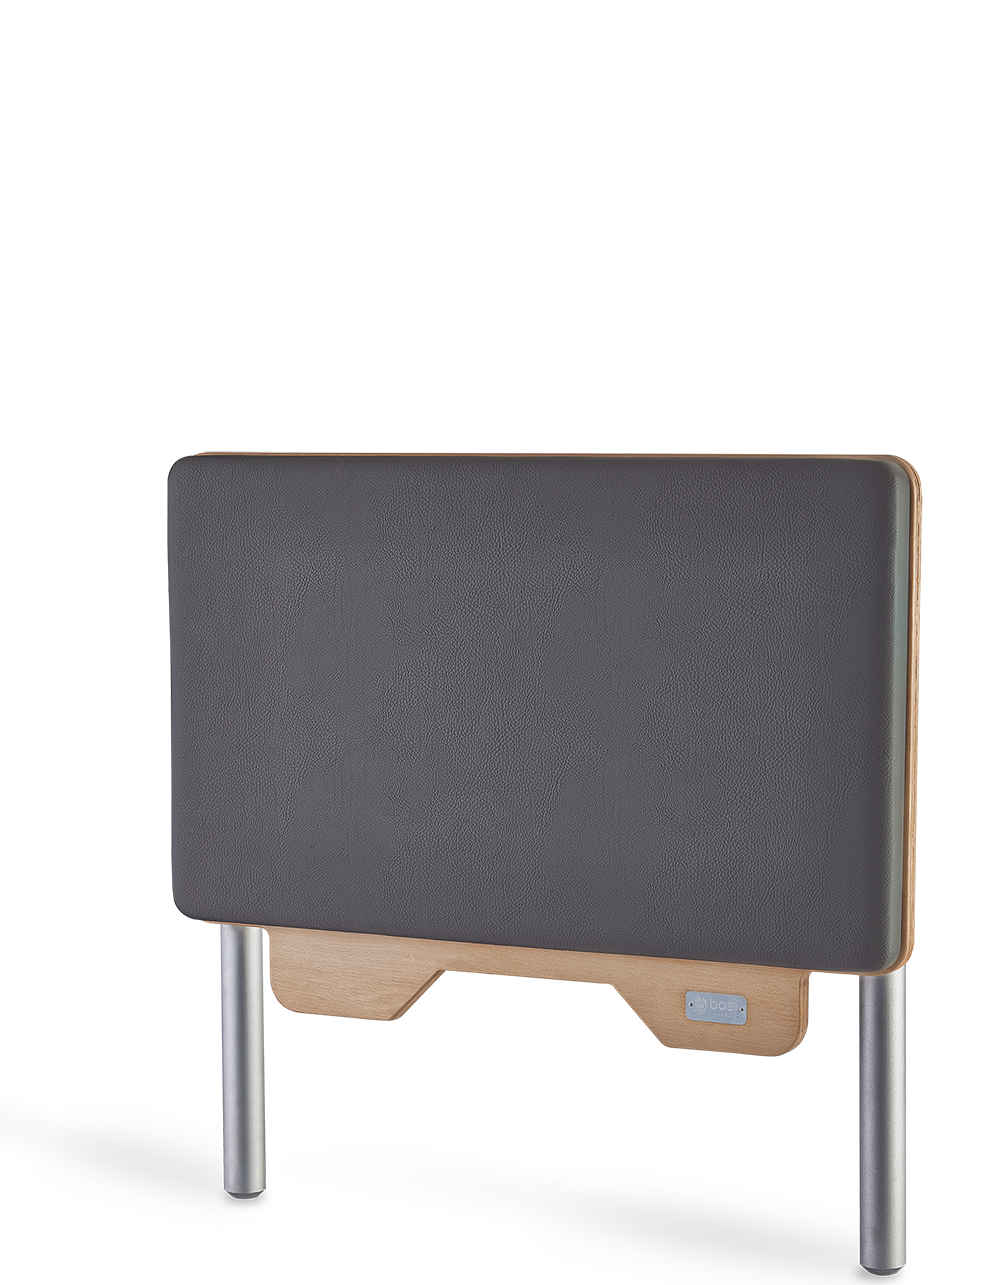 Basi System India Jump Board For Reformer